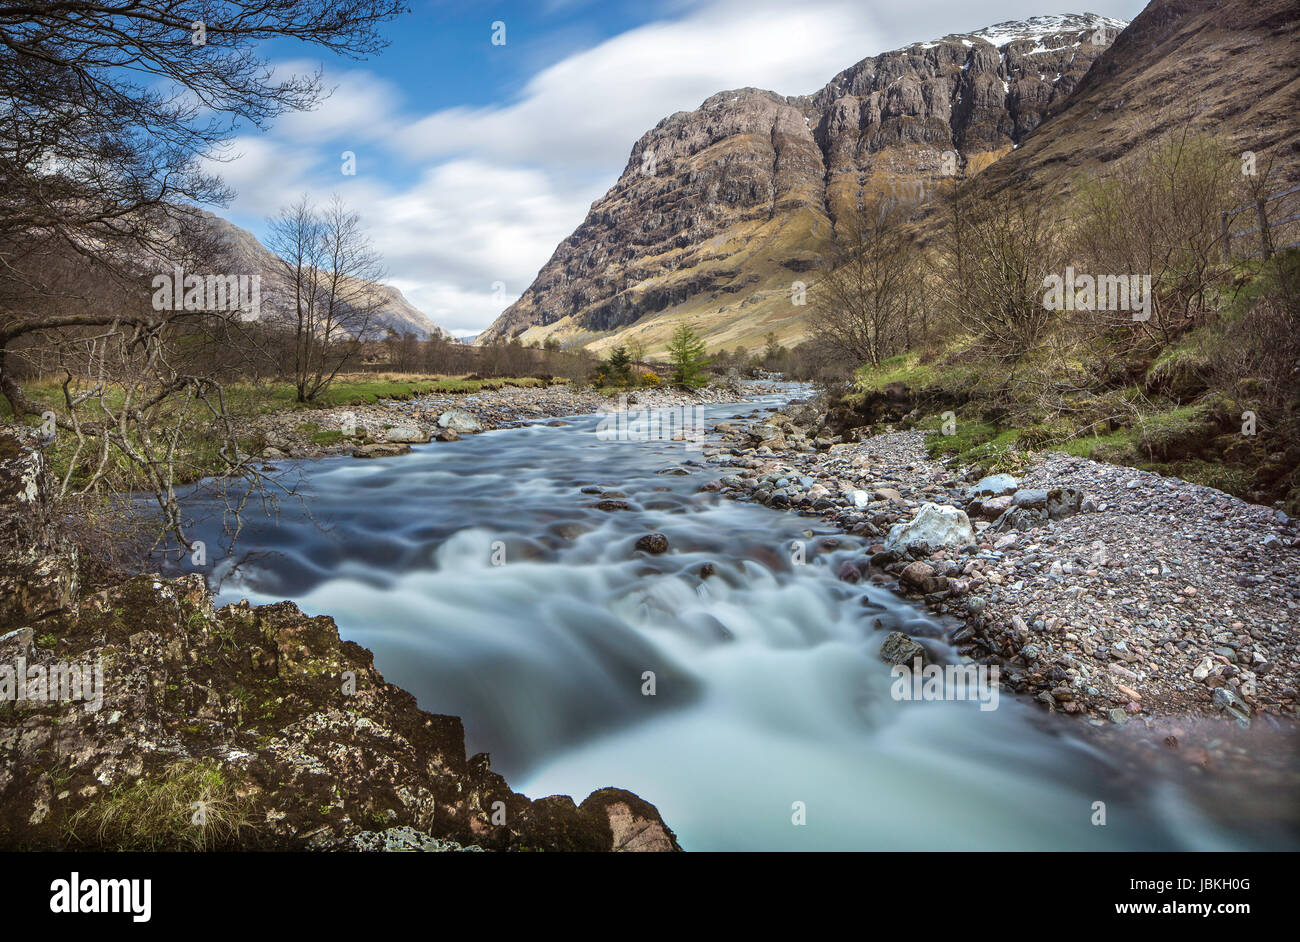 River Coe, Glencoe, taken next to the Clachaig Inn, with Bidean nam Bian and Stop Coire Sgreamhaich mountains in the distance and rushing water Stock Photo